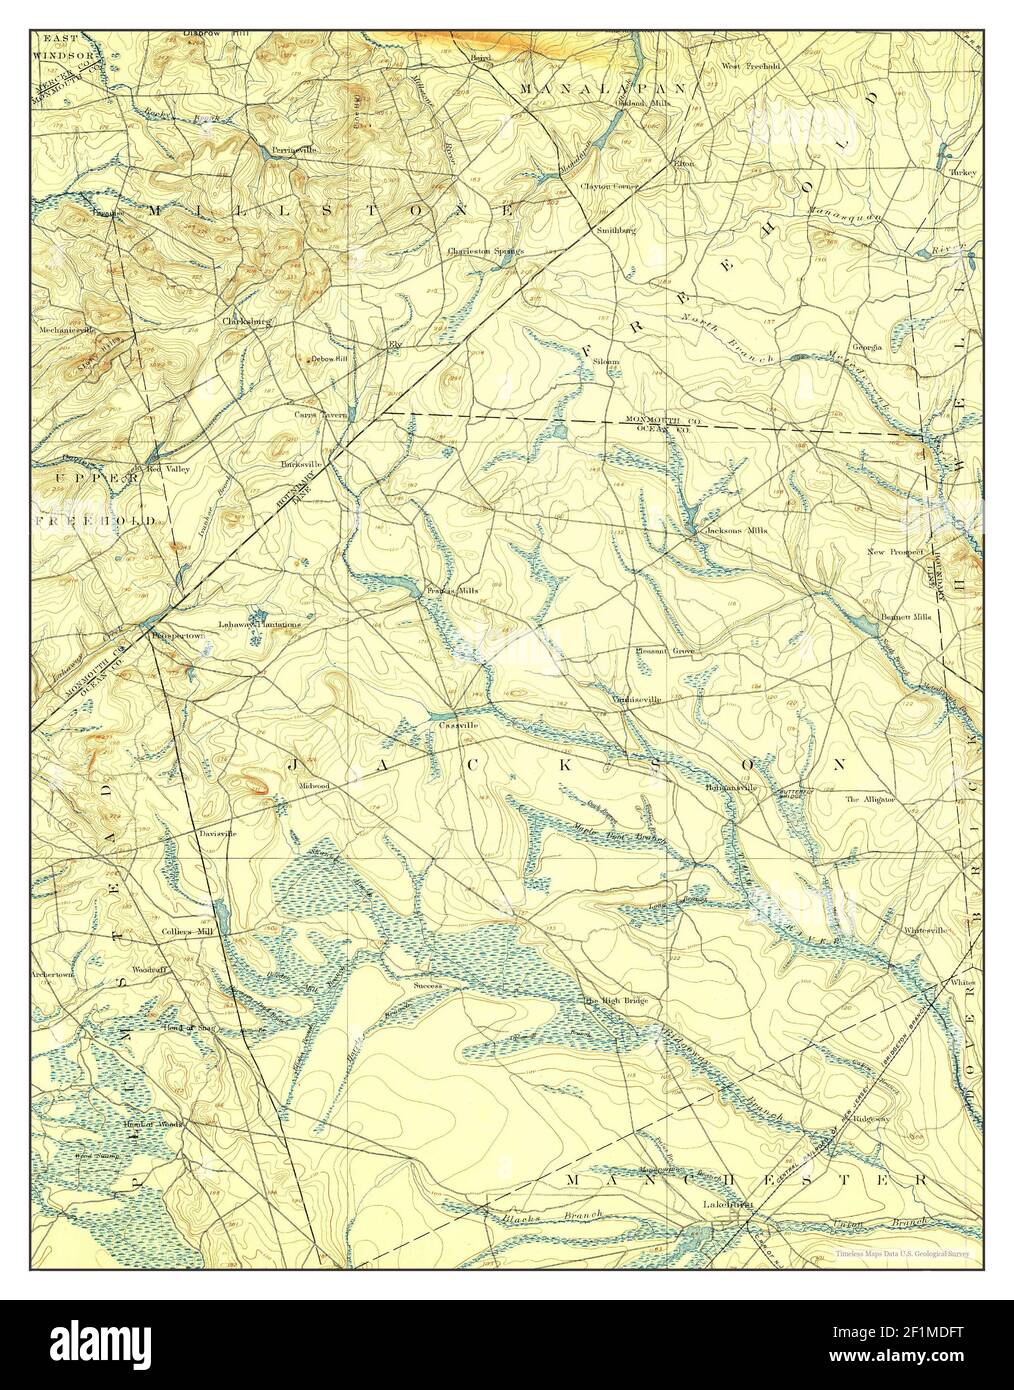 Cassville, New Jersey, map 1900, 1:62500, United States of America by Timeless Maps, data U.S. Geological Survey Stock Photo